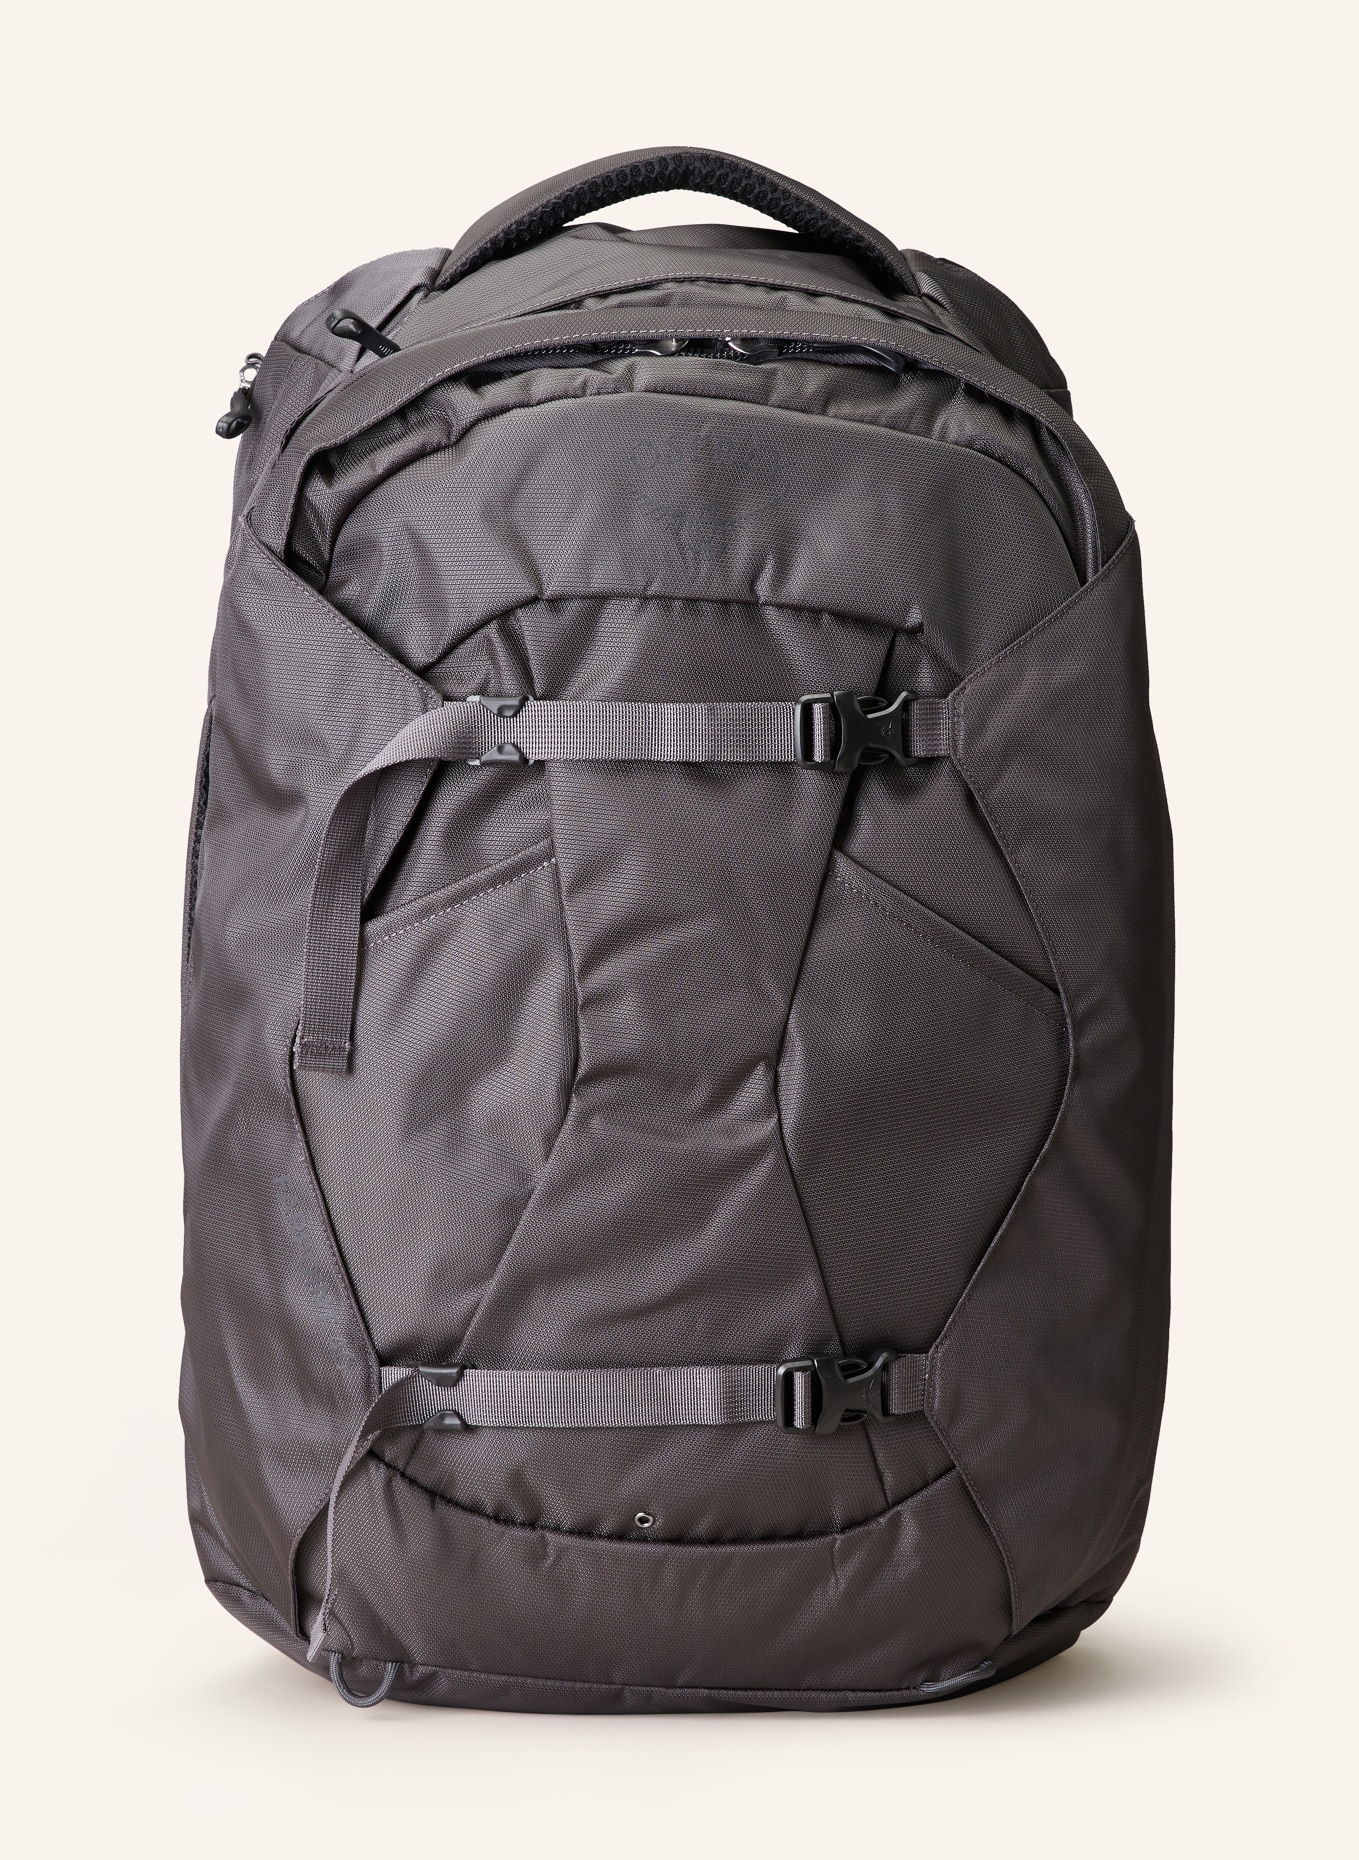 OSPREY Backpack FARPOINT™ 40 l with laptop compartment, Color: GRAY (Image 1)